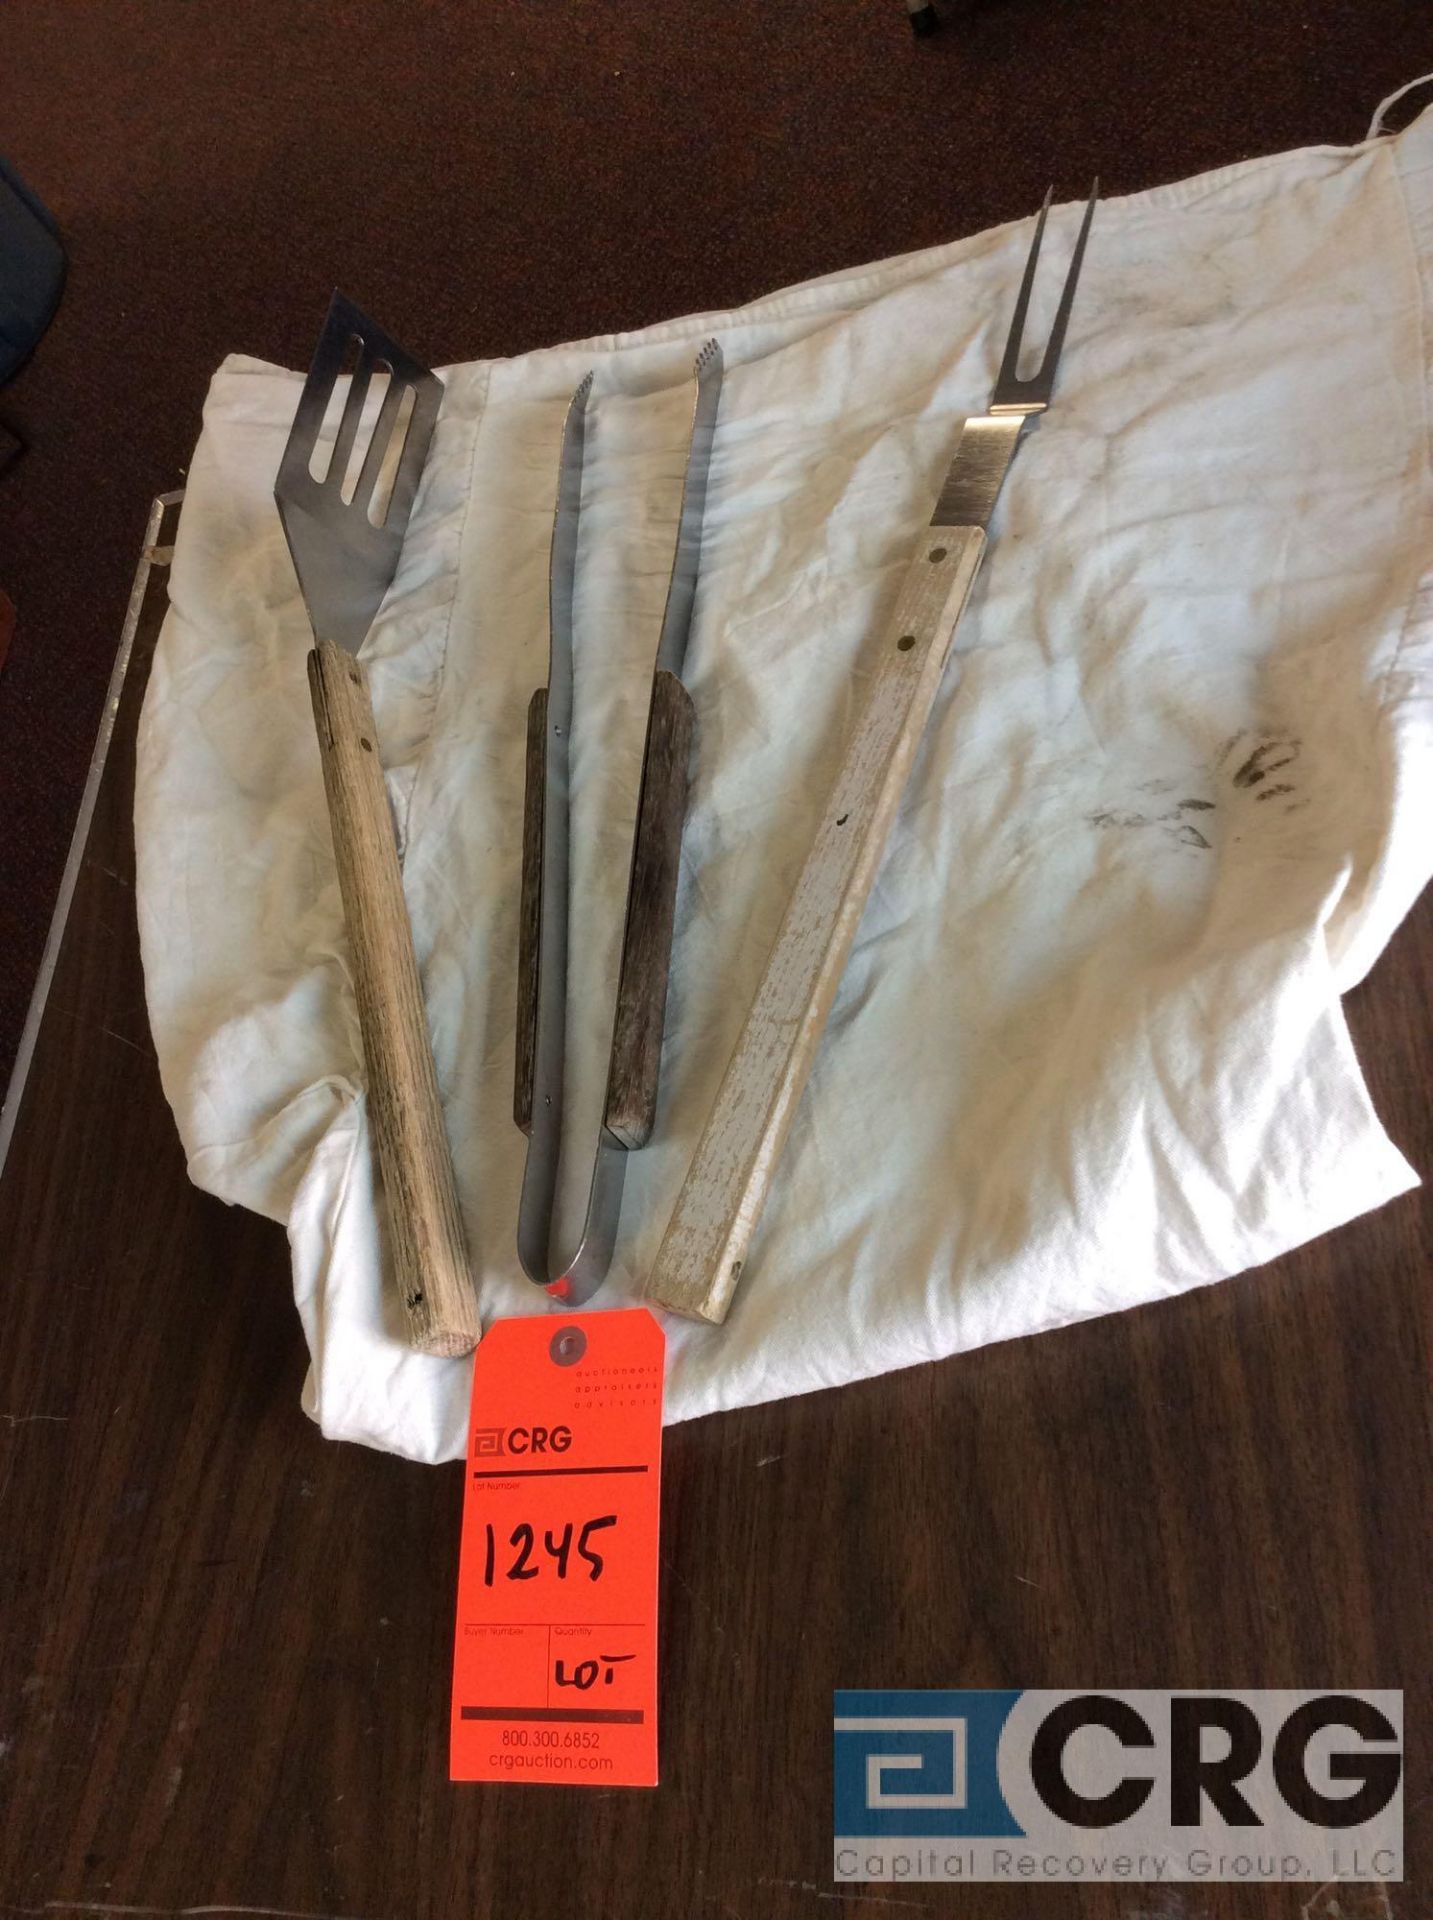 Lot of barbecue serving utensils including (20) forks, (17) spatulas, and (11) tongs